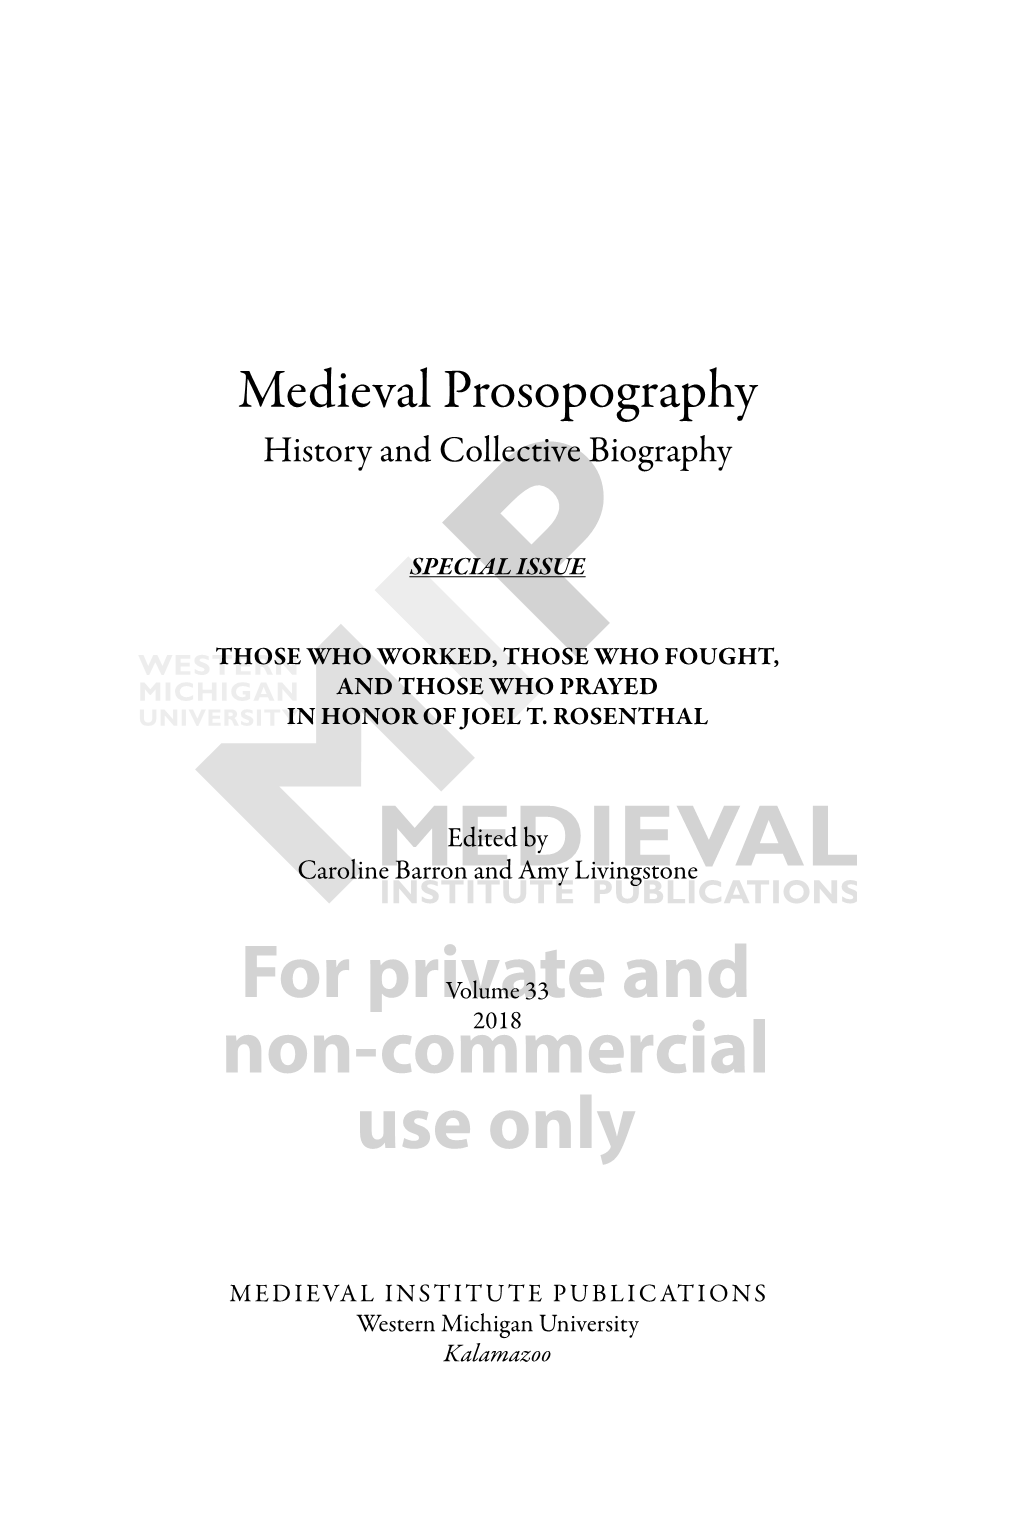 Medieval Prosopography History and Collective Biography